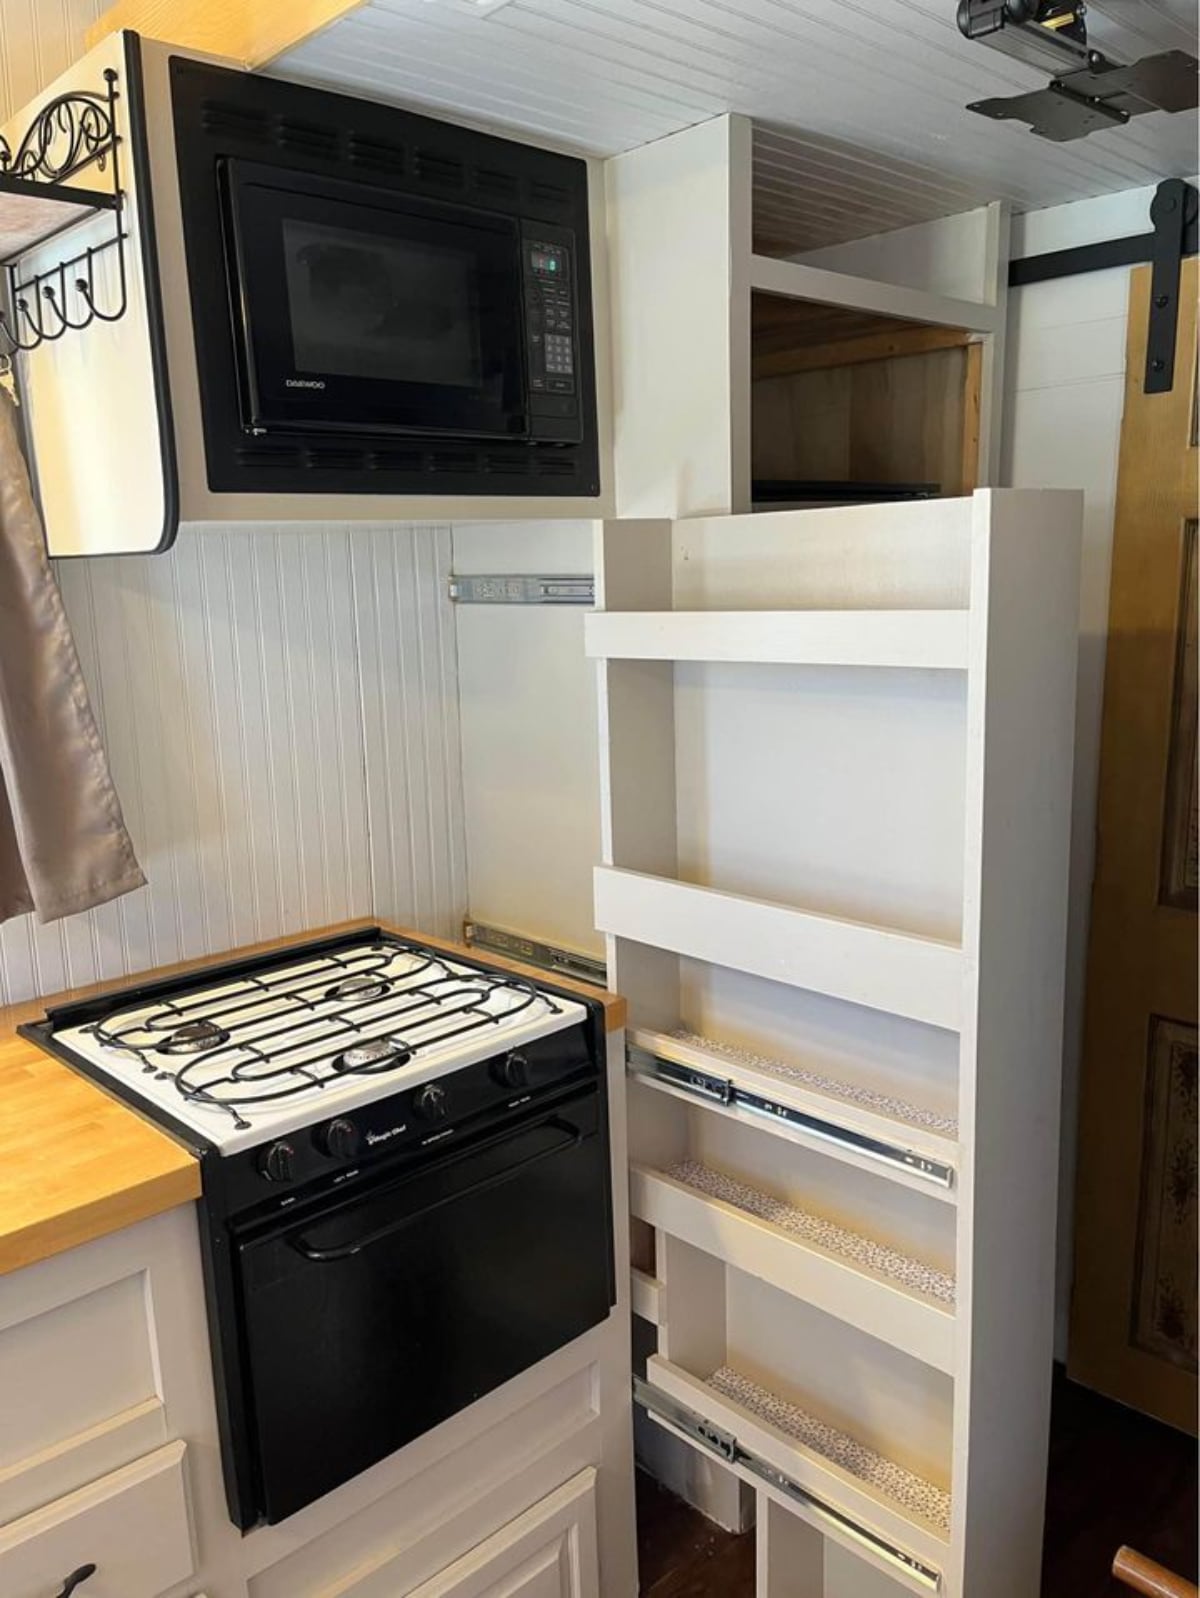 Kitchen of 152 sf Micro Tiny Home has a burner, a sink, an oven and slide out pantry rack beside the refrigerator and lots of storage cabinet